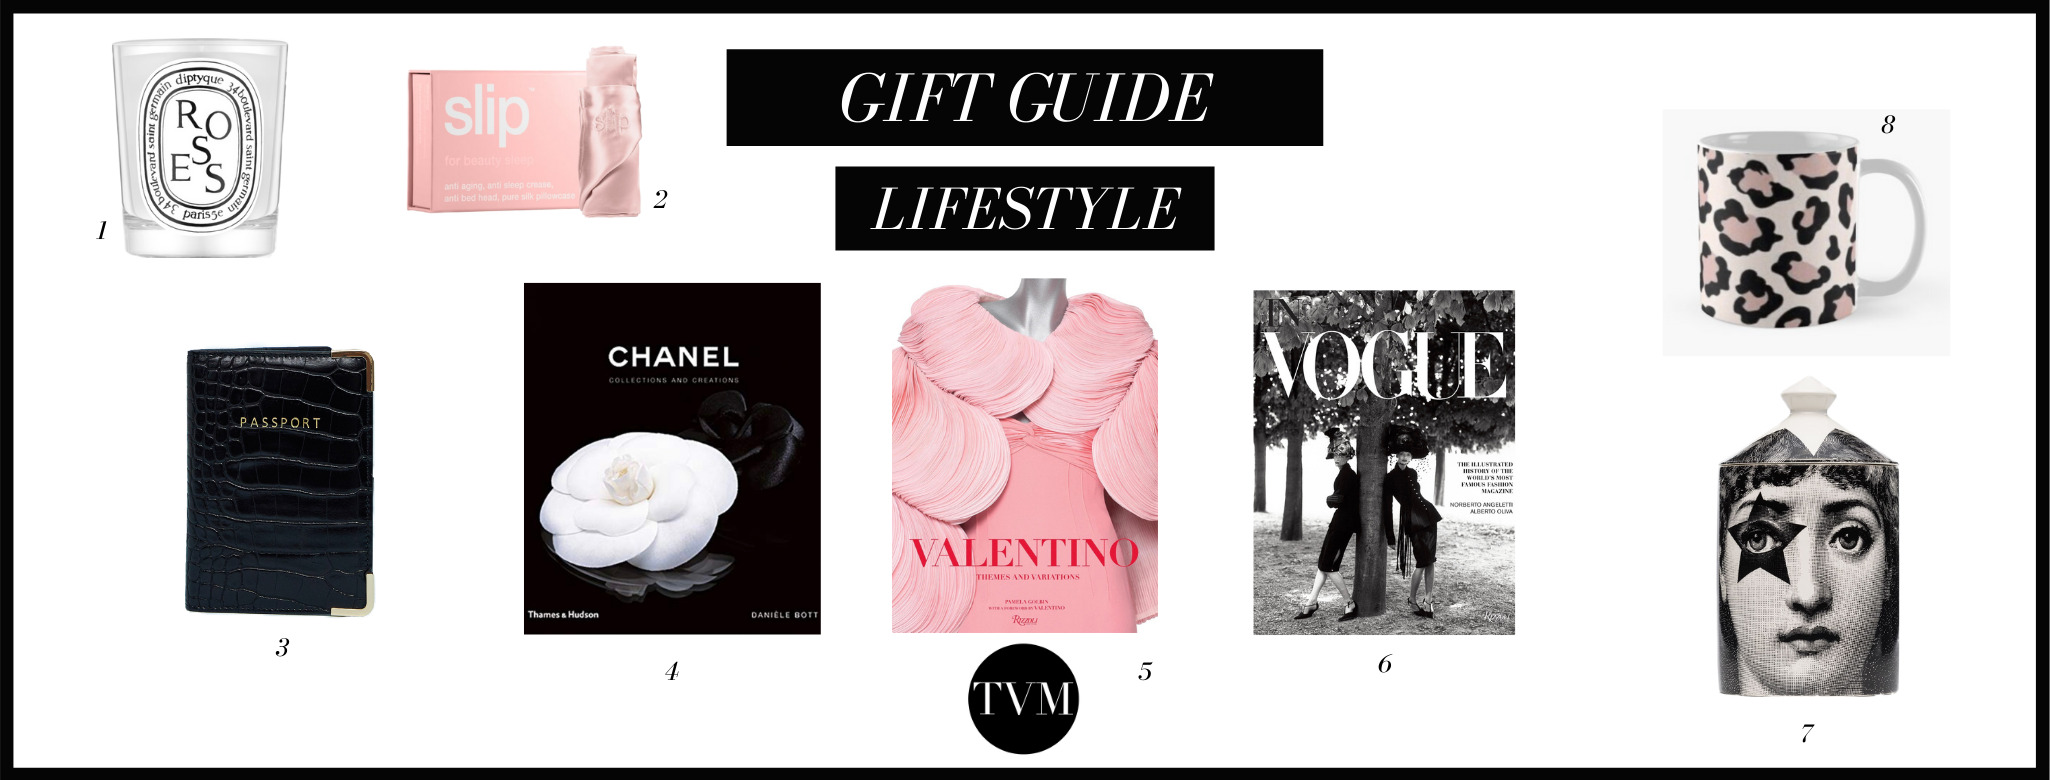 gift guide for her